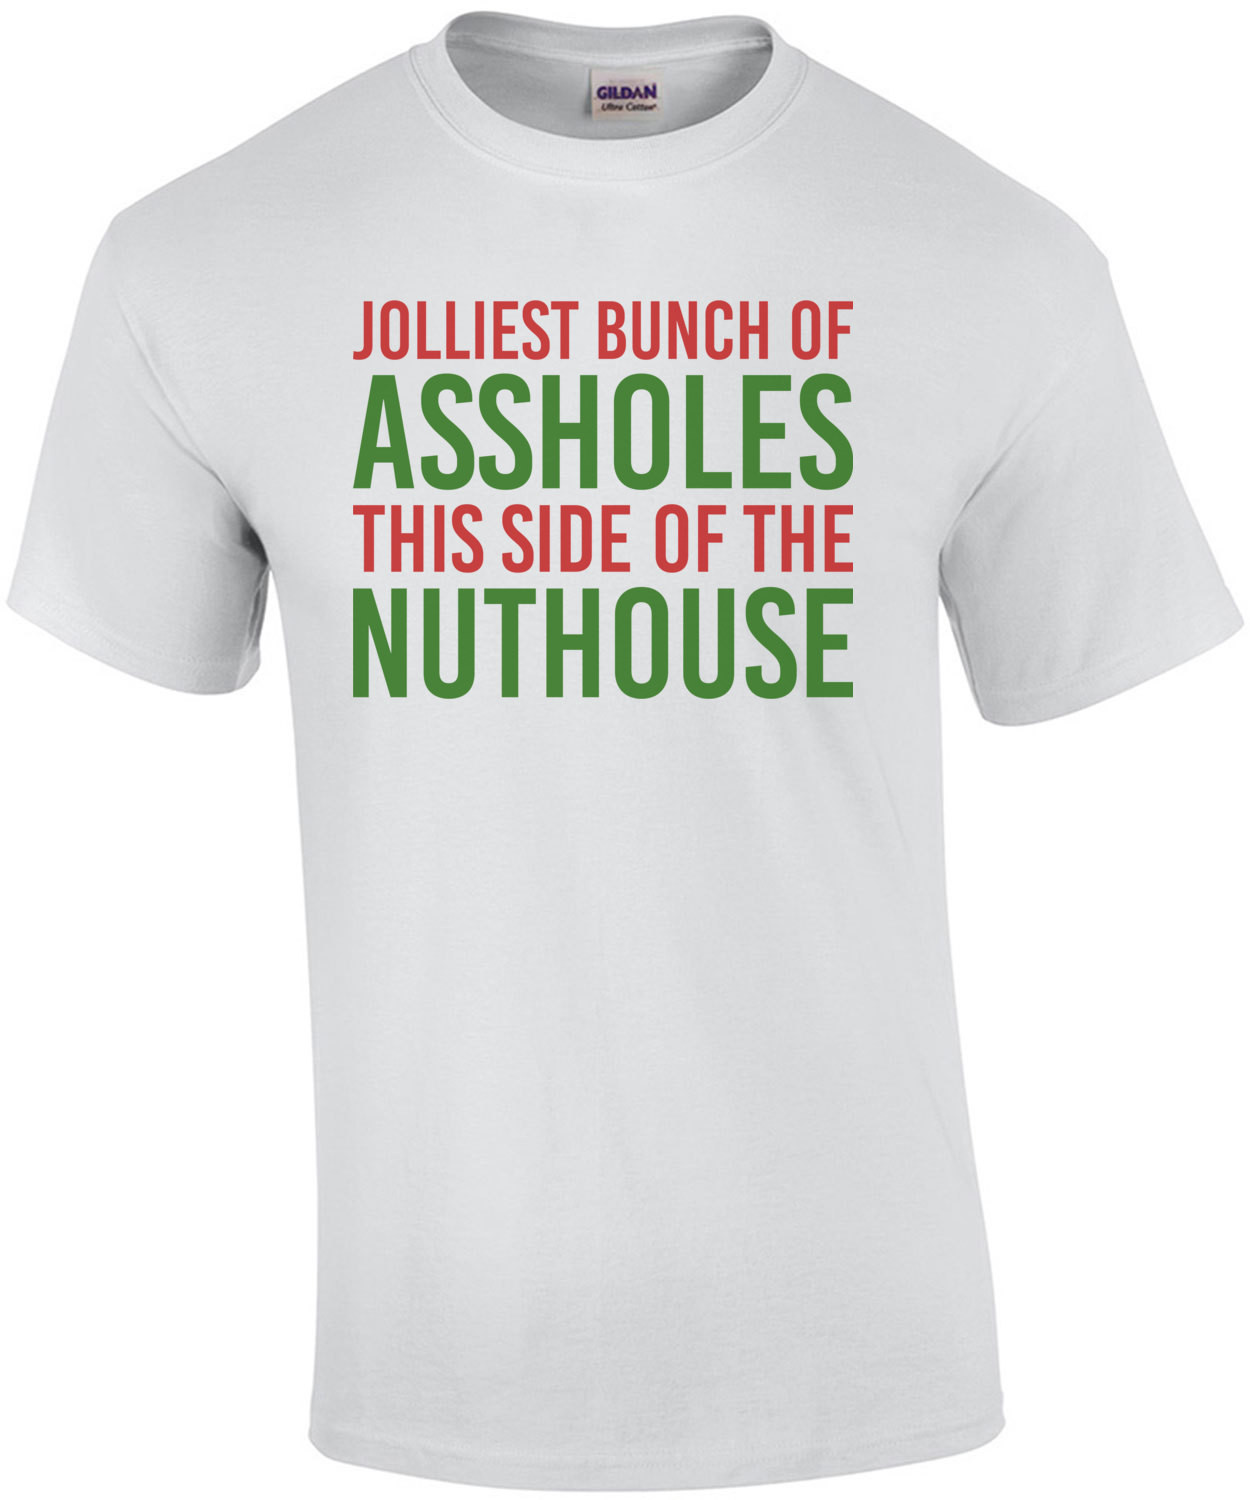 Jolliest bunch of assholes this side of the nuthouse - Christmas Vacation - Funny Christmas T-Shirt